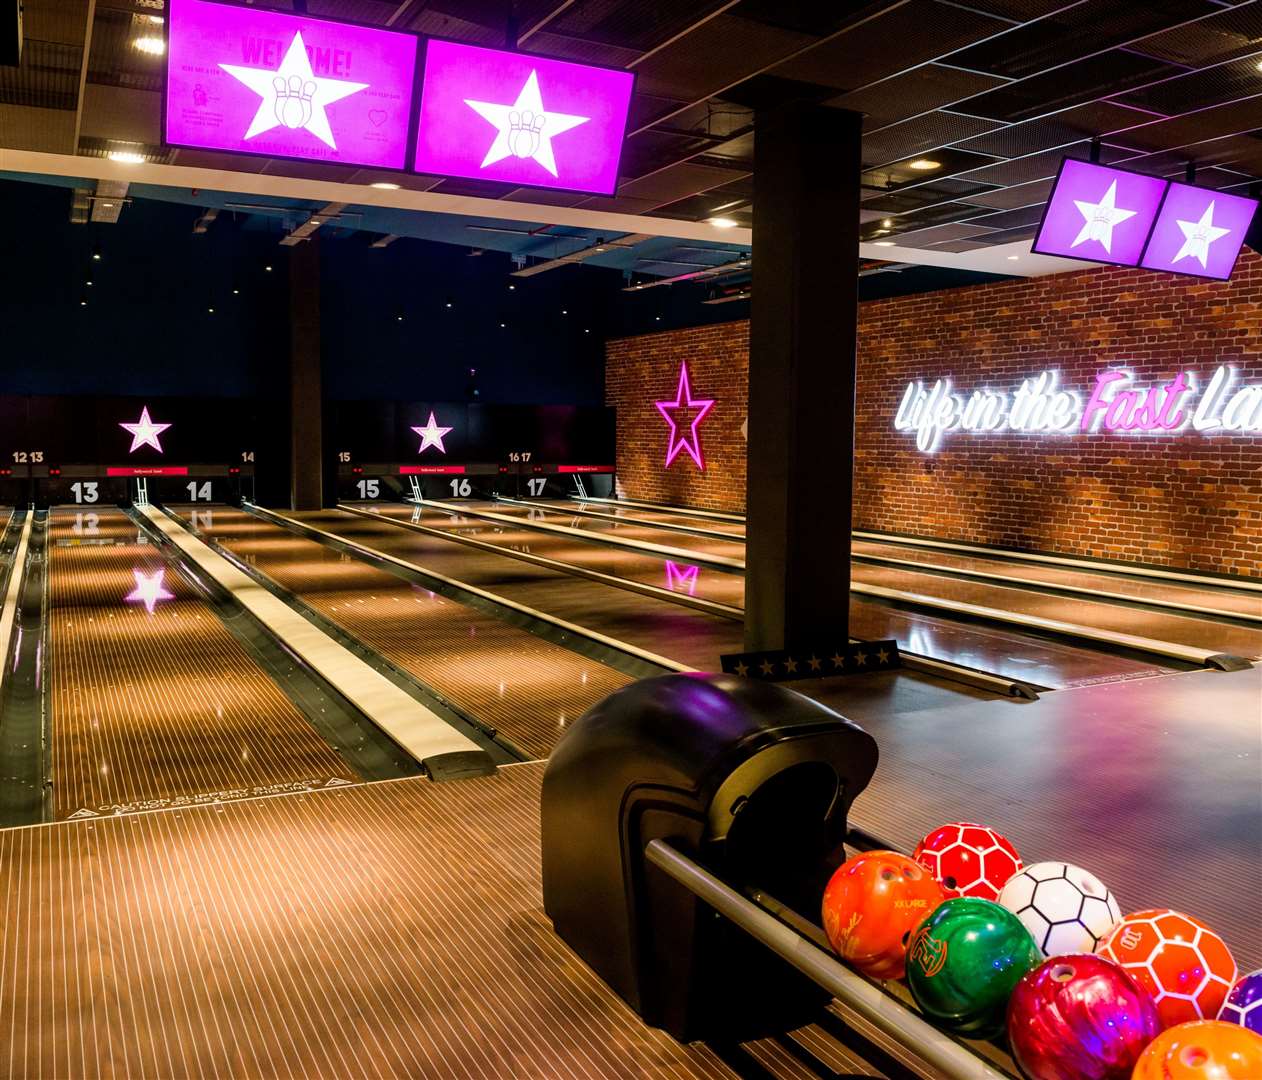 Hollywood Bowl Westwood Cross will offer family entertainment and feature 22 ten-pin bowling lanes. Picture: Hollywood Bowl